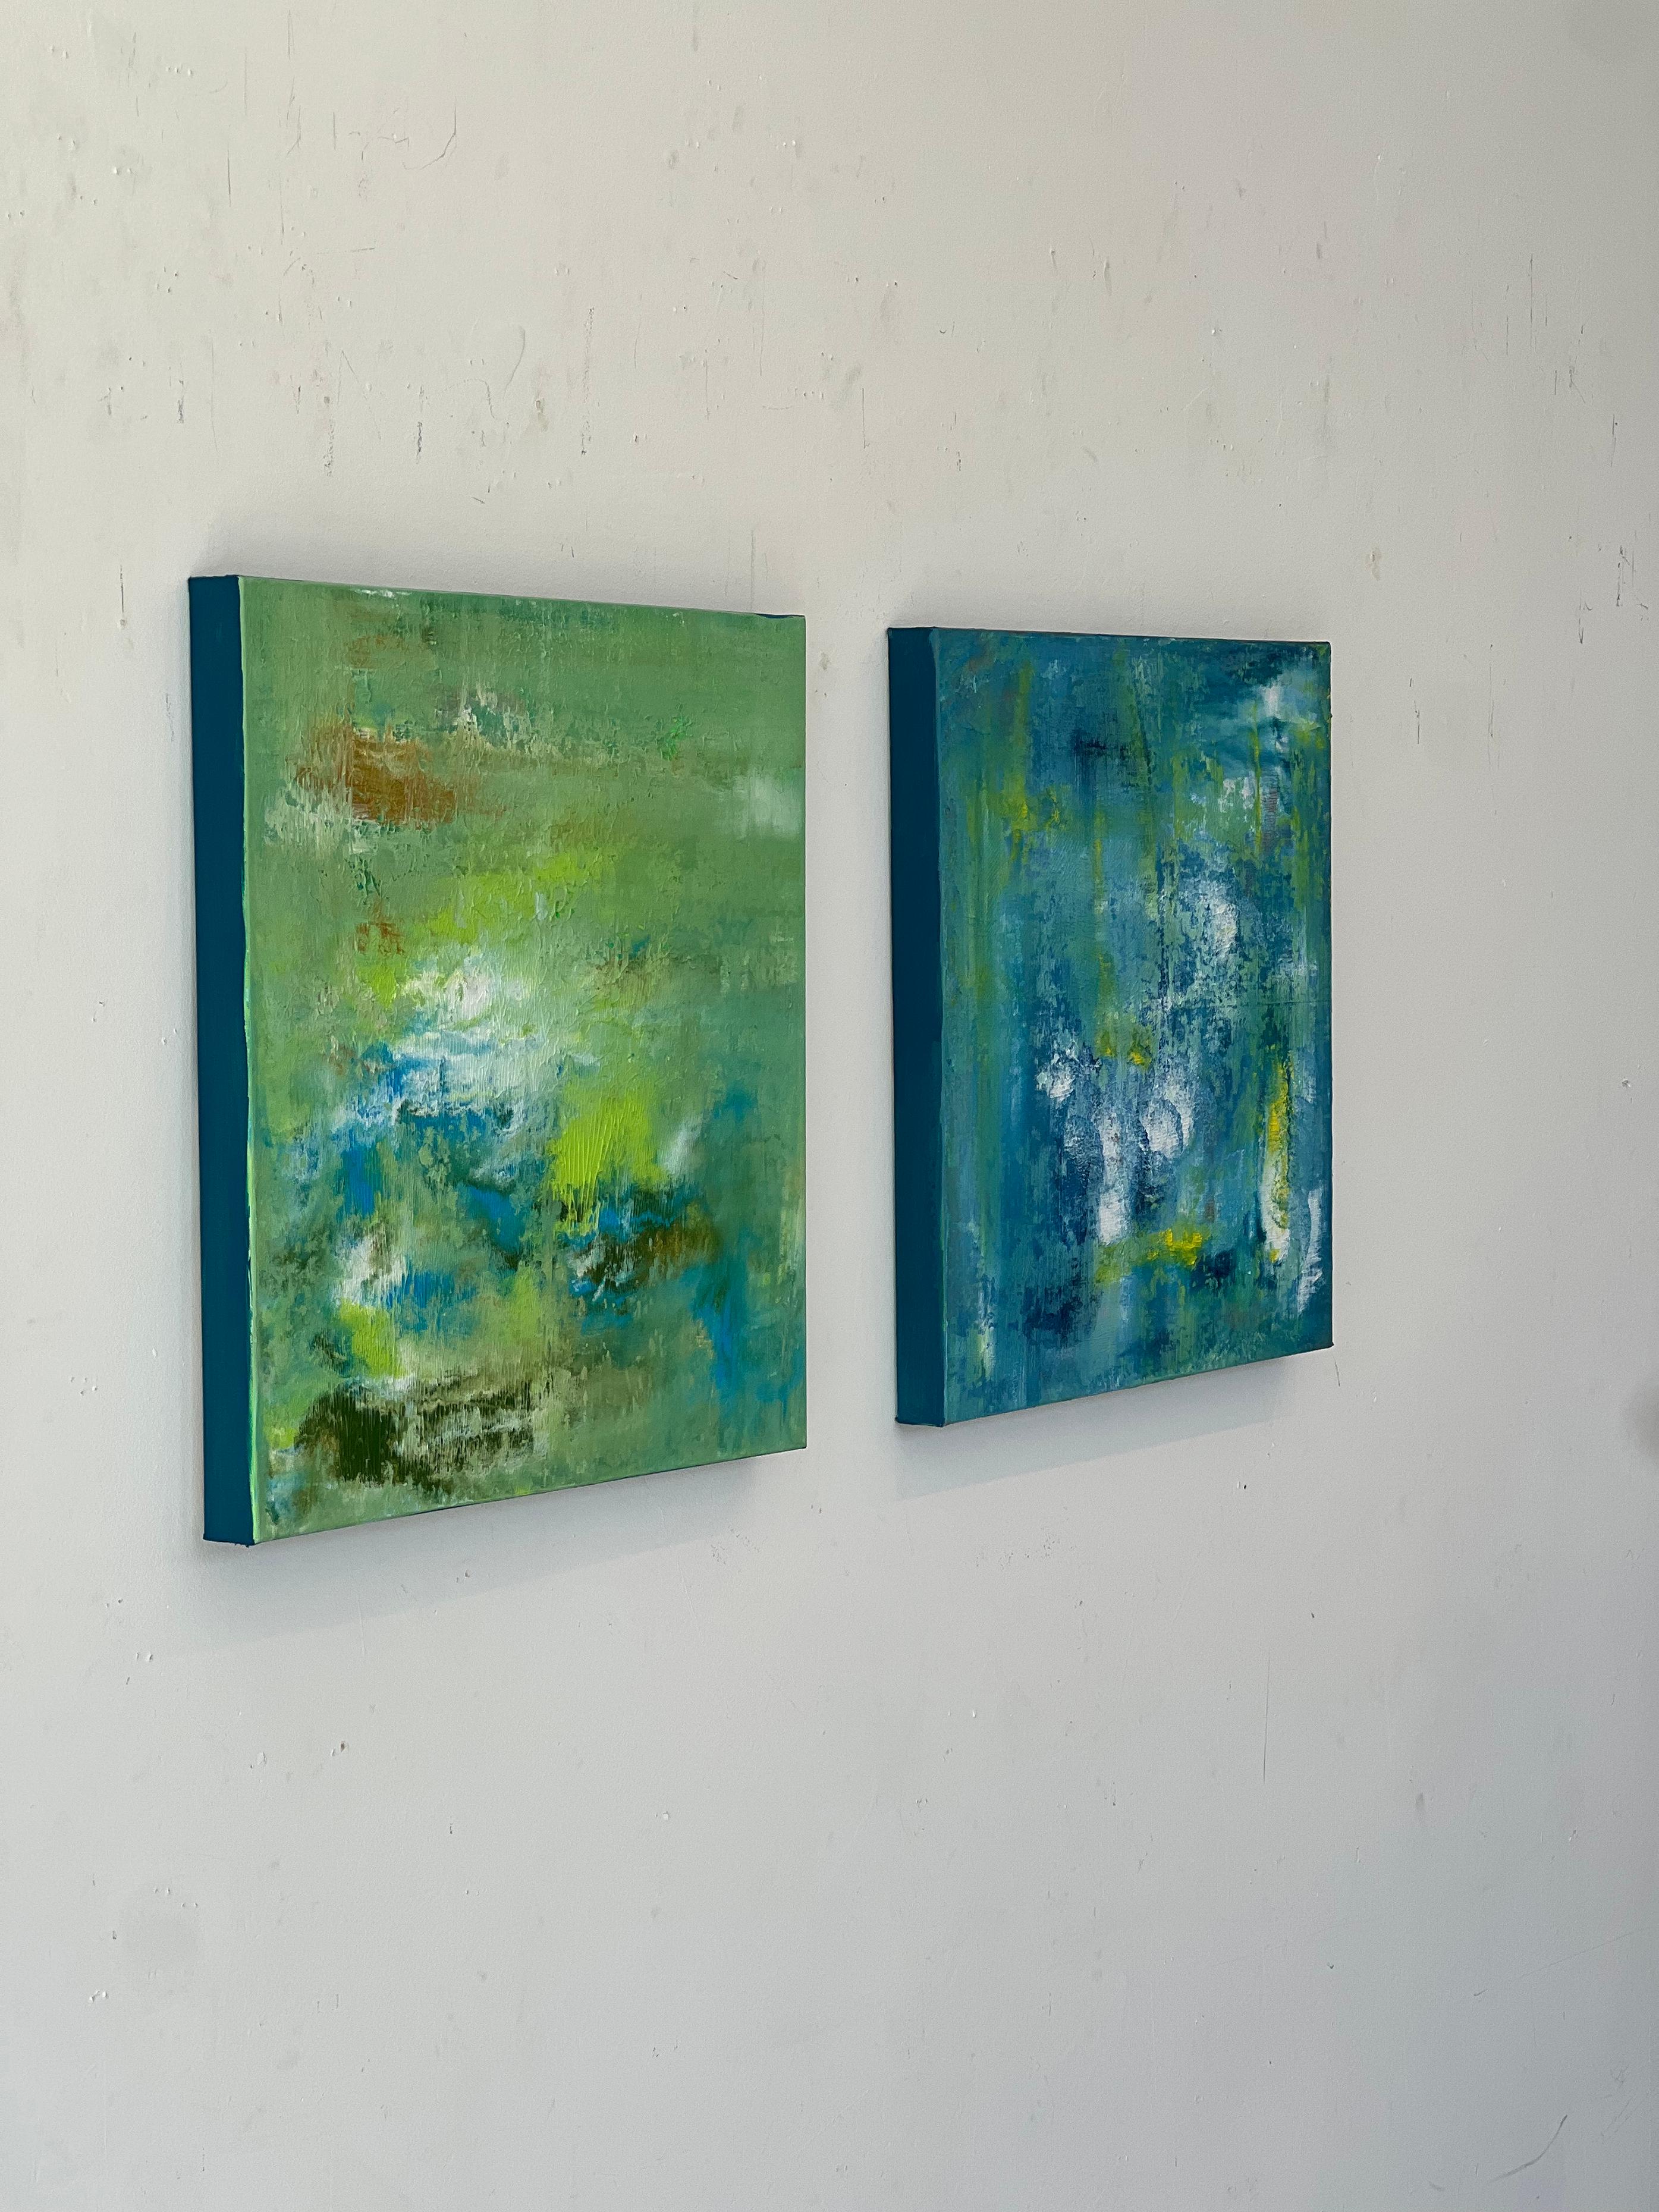 Diptych Opal 1 & 2 - acrylic on canvas - Blue Abstract Painting by Nina Weintraub